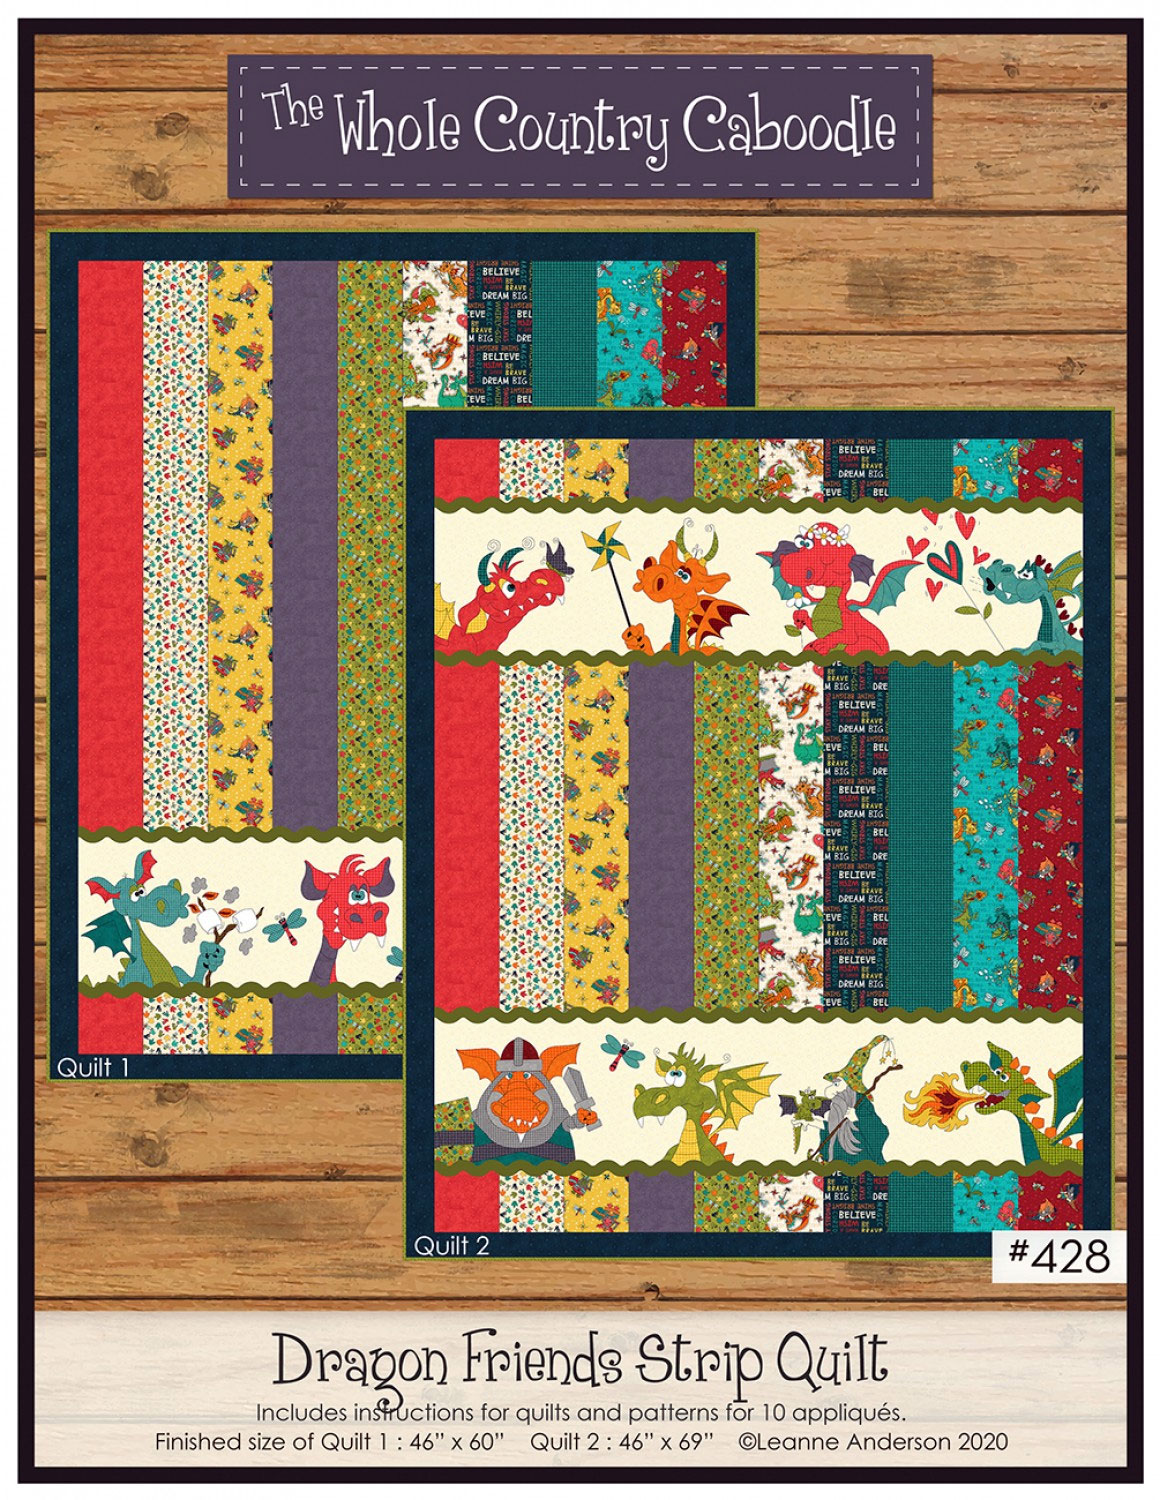 Dragon-Friends-Strip-Quilt-sewing-pattern-The-Whole-Country-Caboodle-front